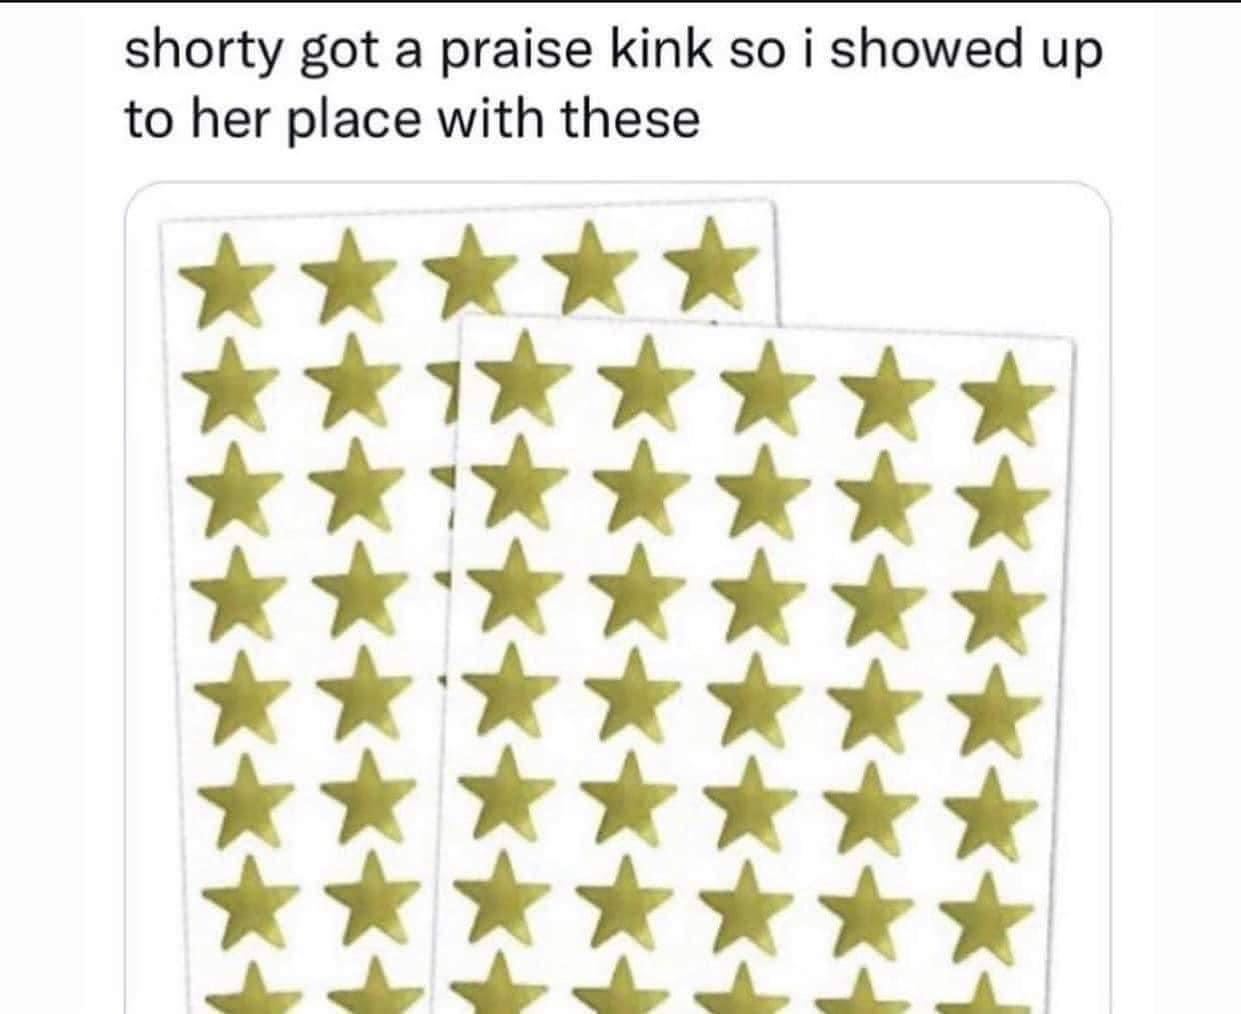 monday morning randomness - star stickers - shorty got a praise kink so i showed up to her place with these